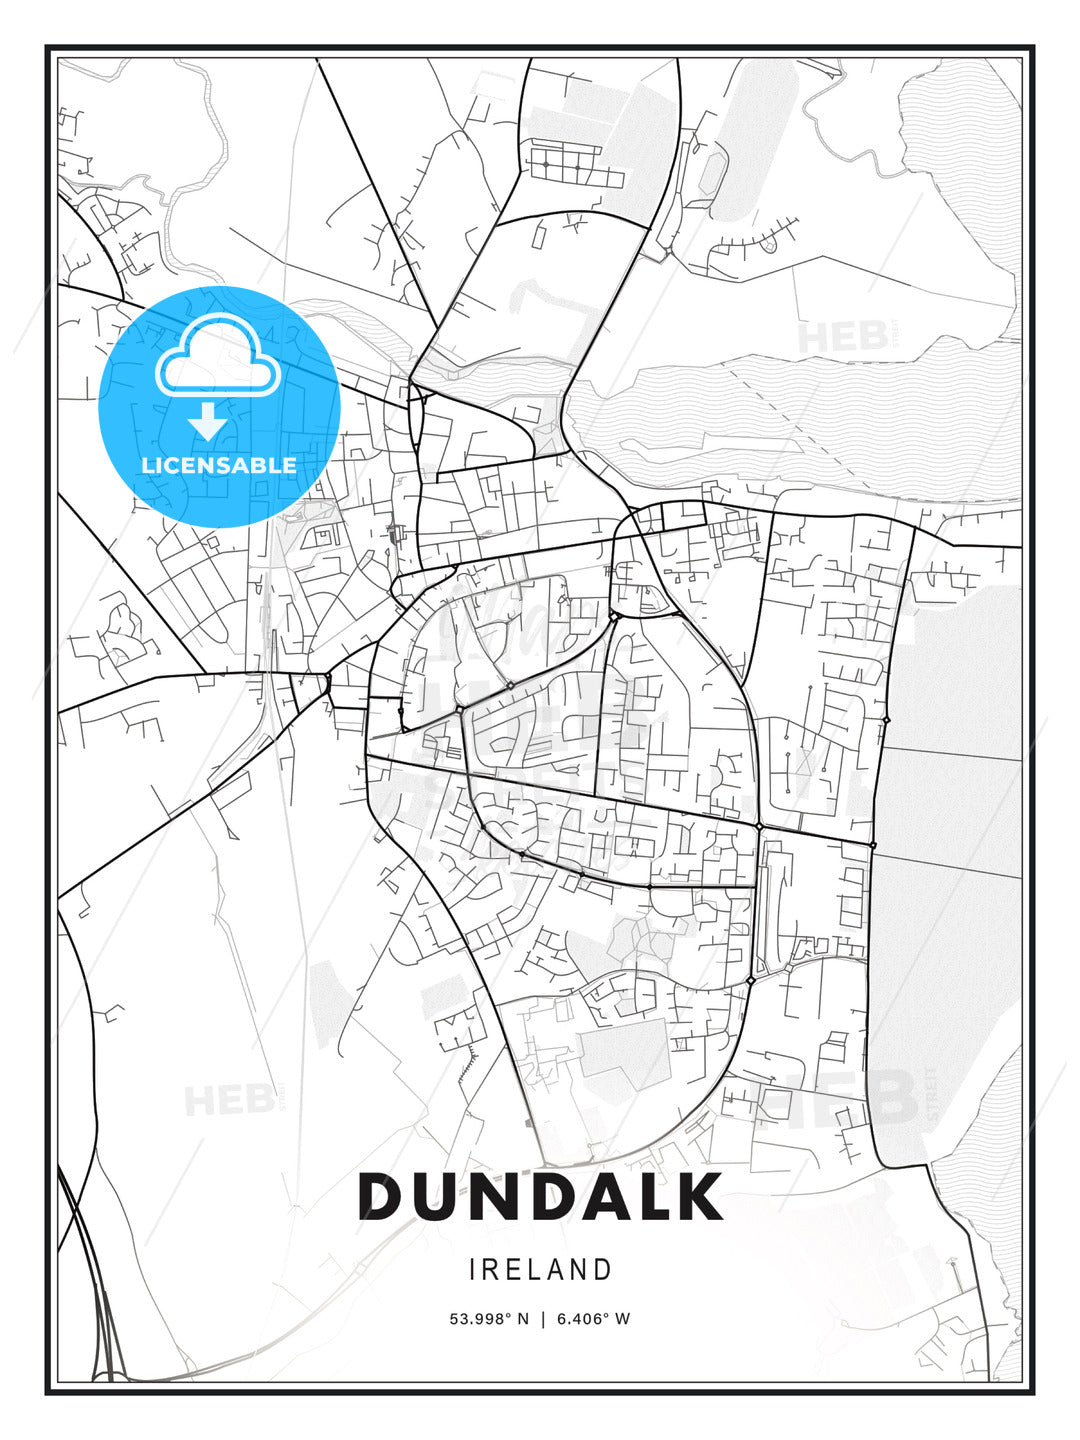 Dundalk, Ireland, Modern Print Template in Various Formats - HEBSTREITS Sketches